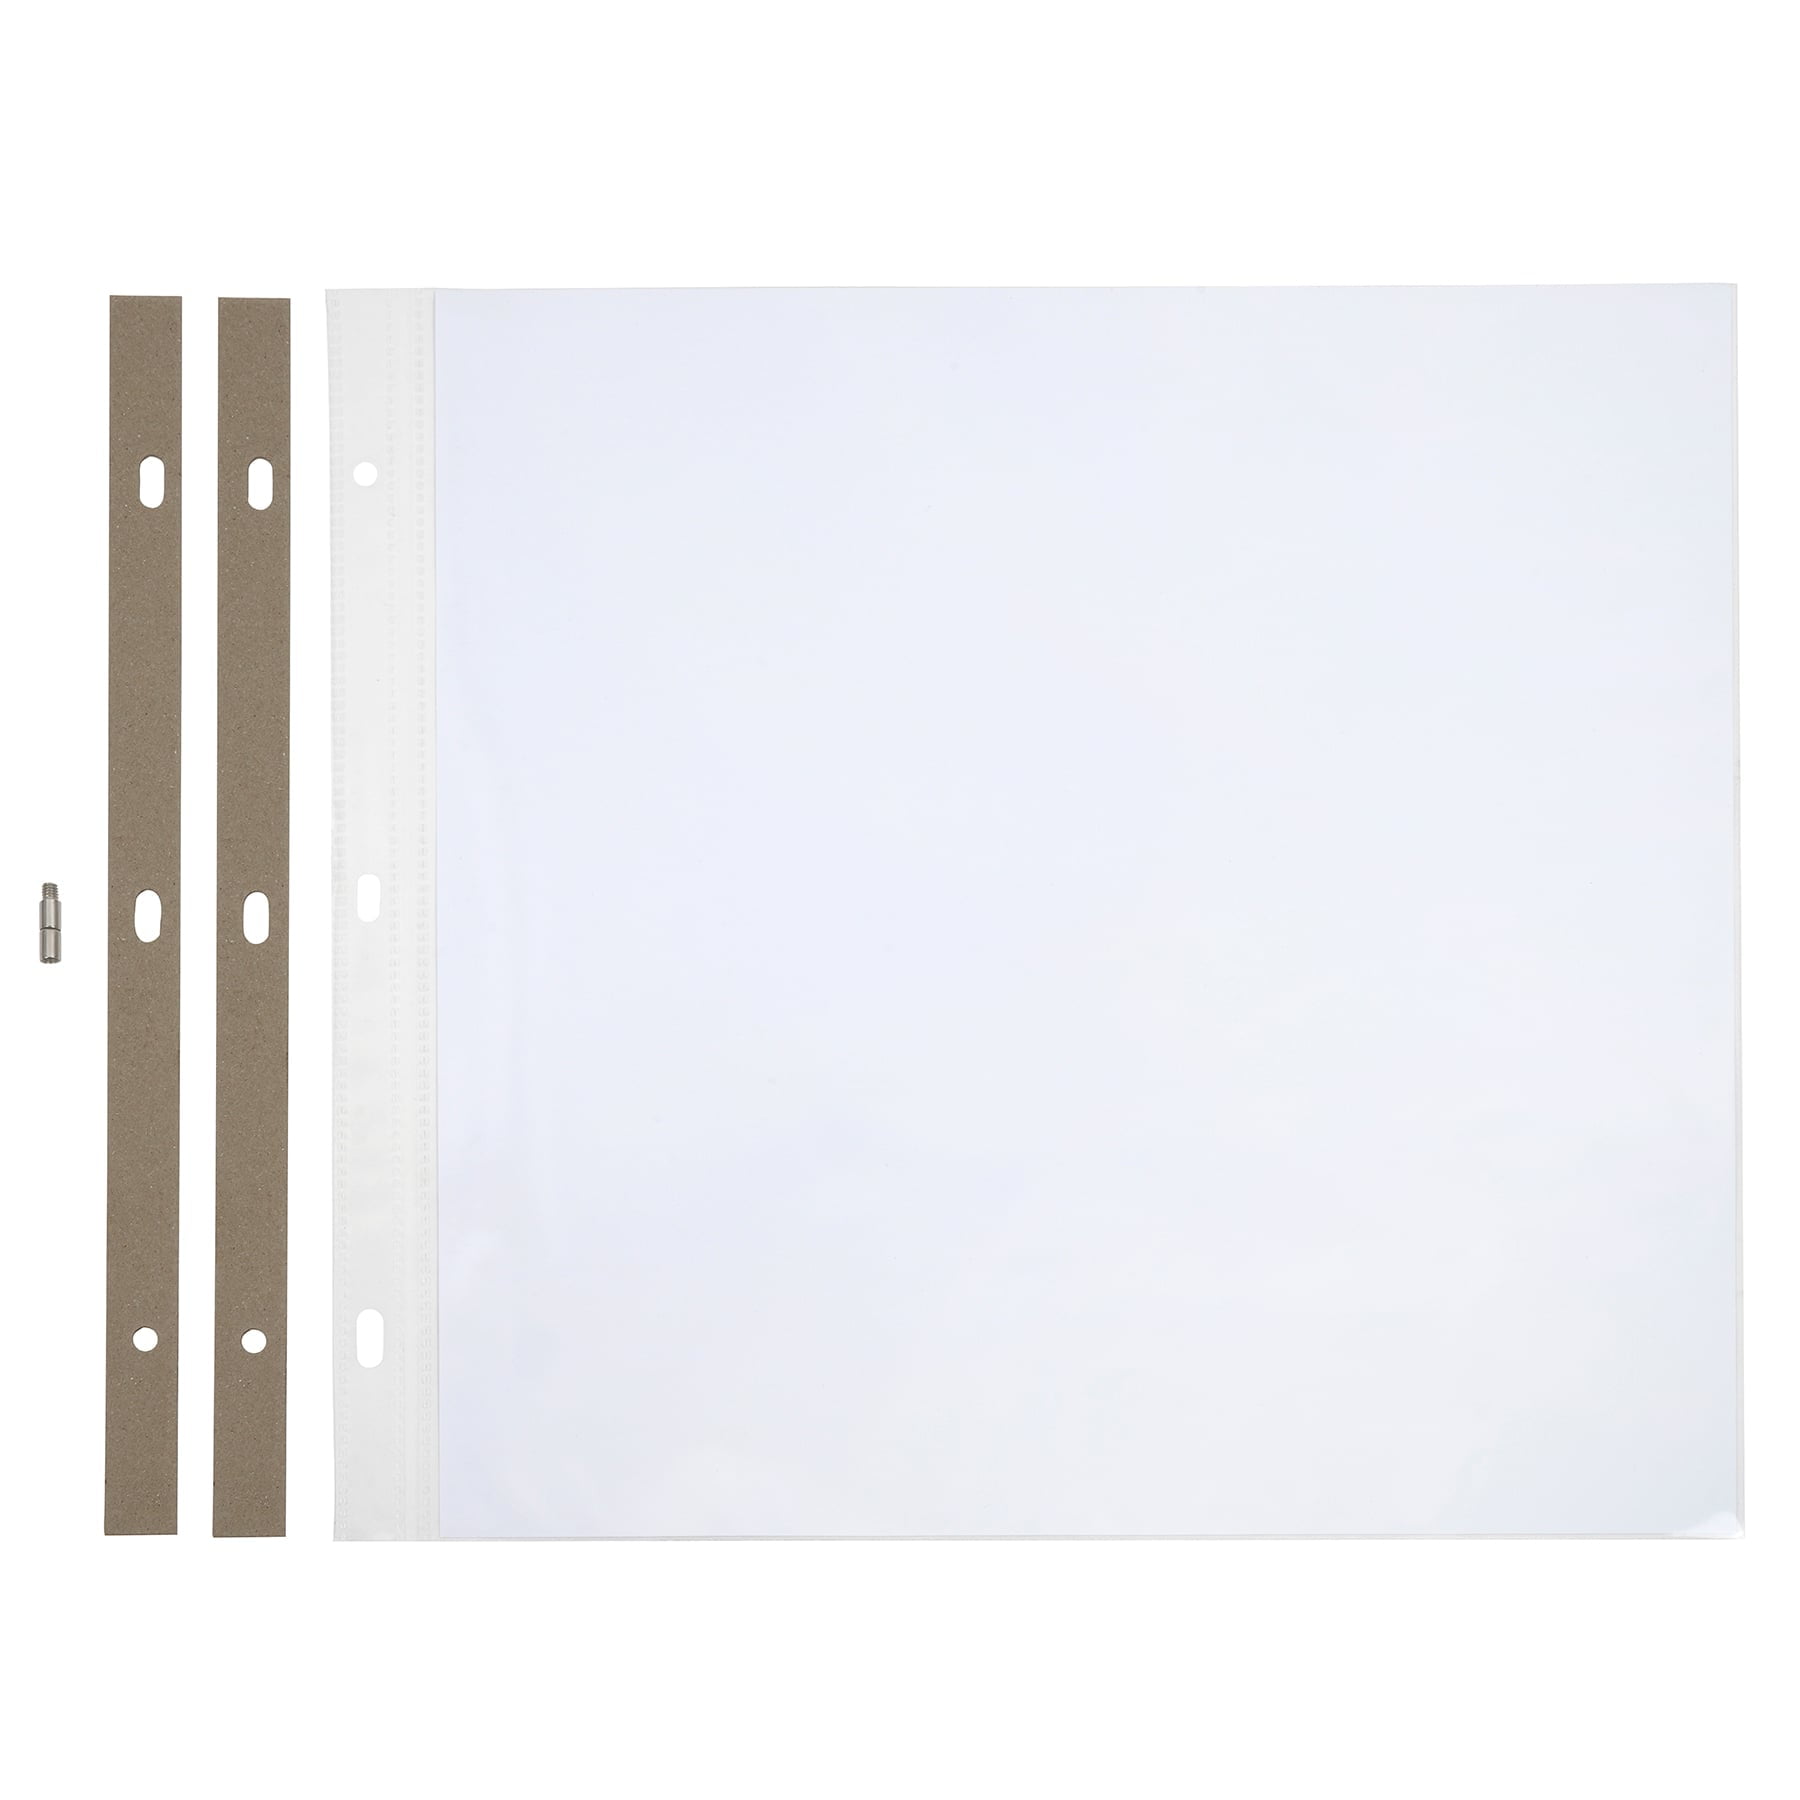 White Bonded Leather 12 x 12 Scrapbook by Dalee Book